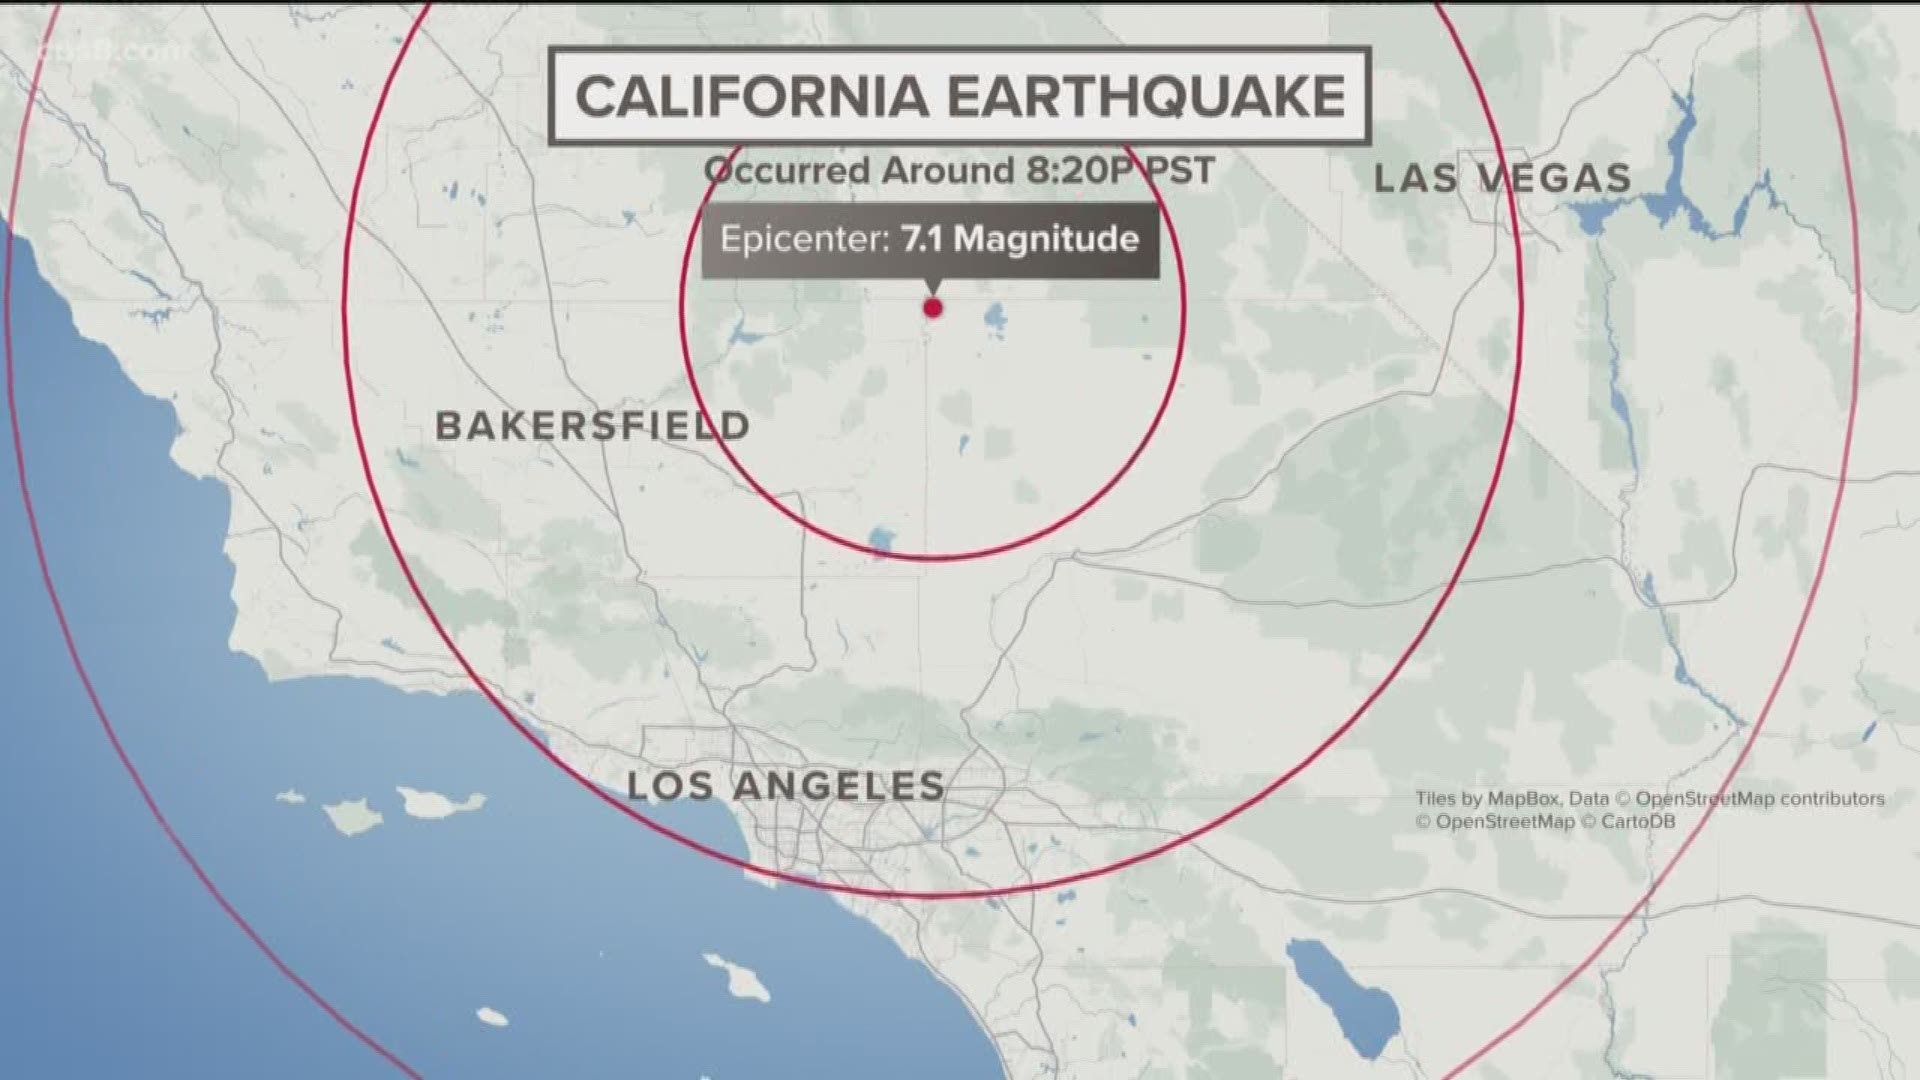 A powerful 7.1 magnitude earthquake hit the Ridgecrest area in California - near the same location of Thursday's Fourth of July 6.4 magnitude earthquake.